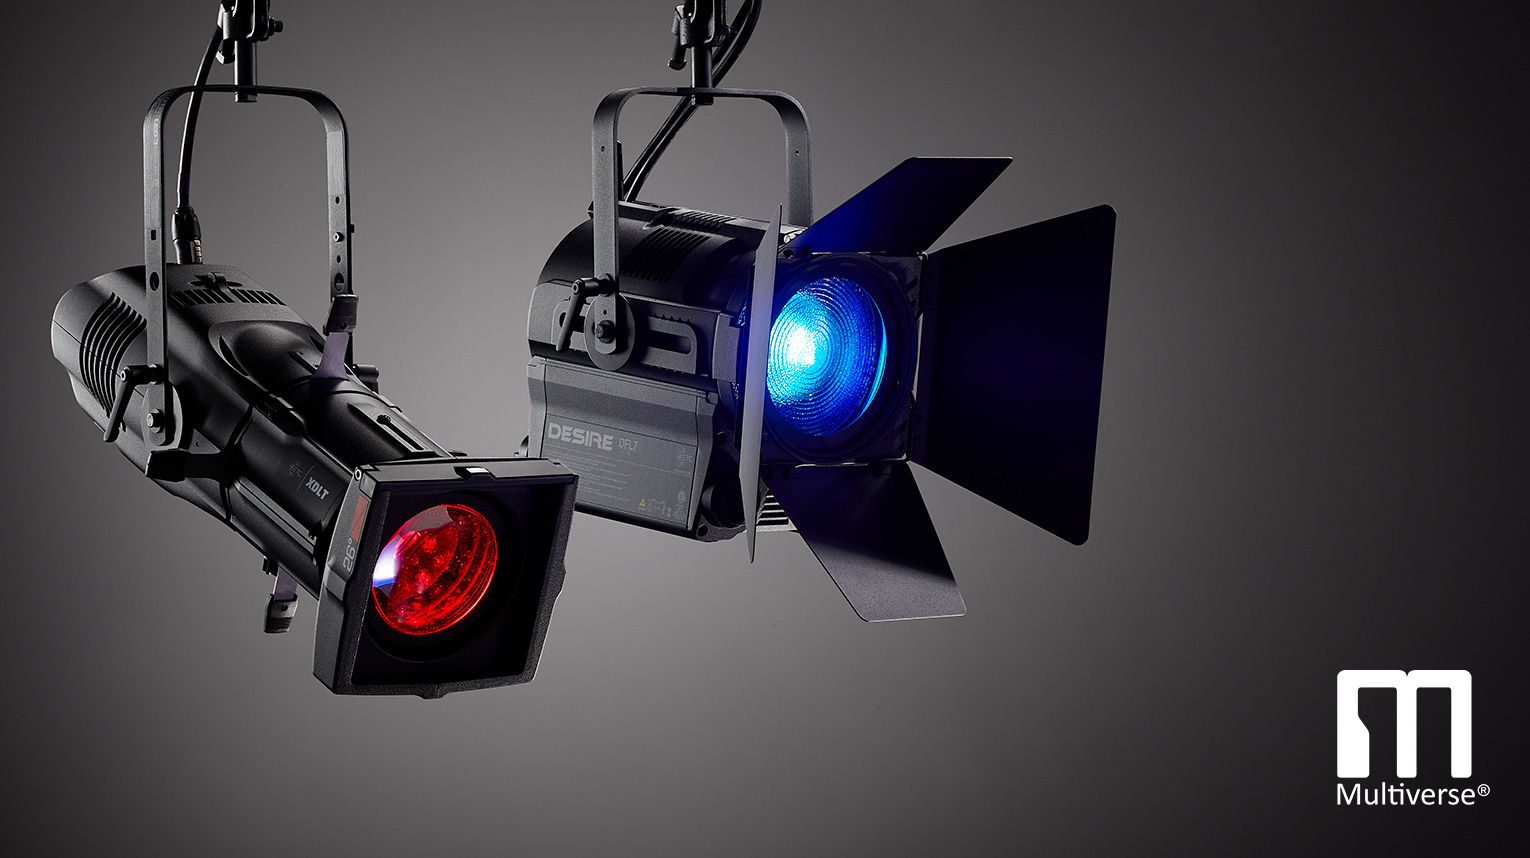 ETC's Source 4 LED Series 3 and Desire Fresnel fixtures with Multiverse wireless DMX/RDM technology